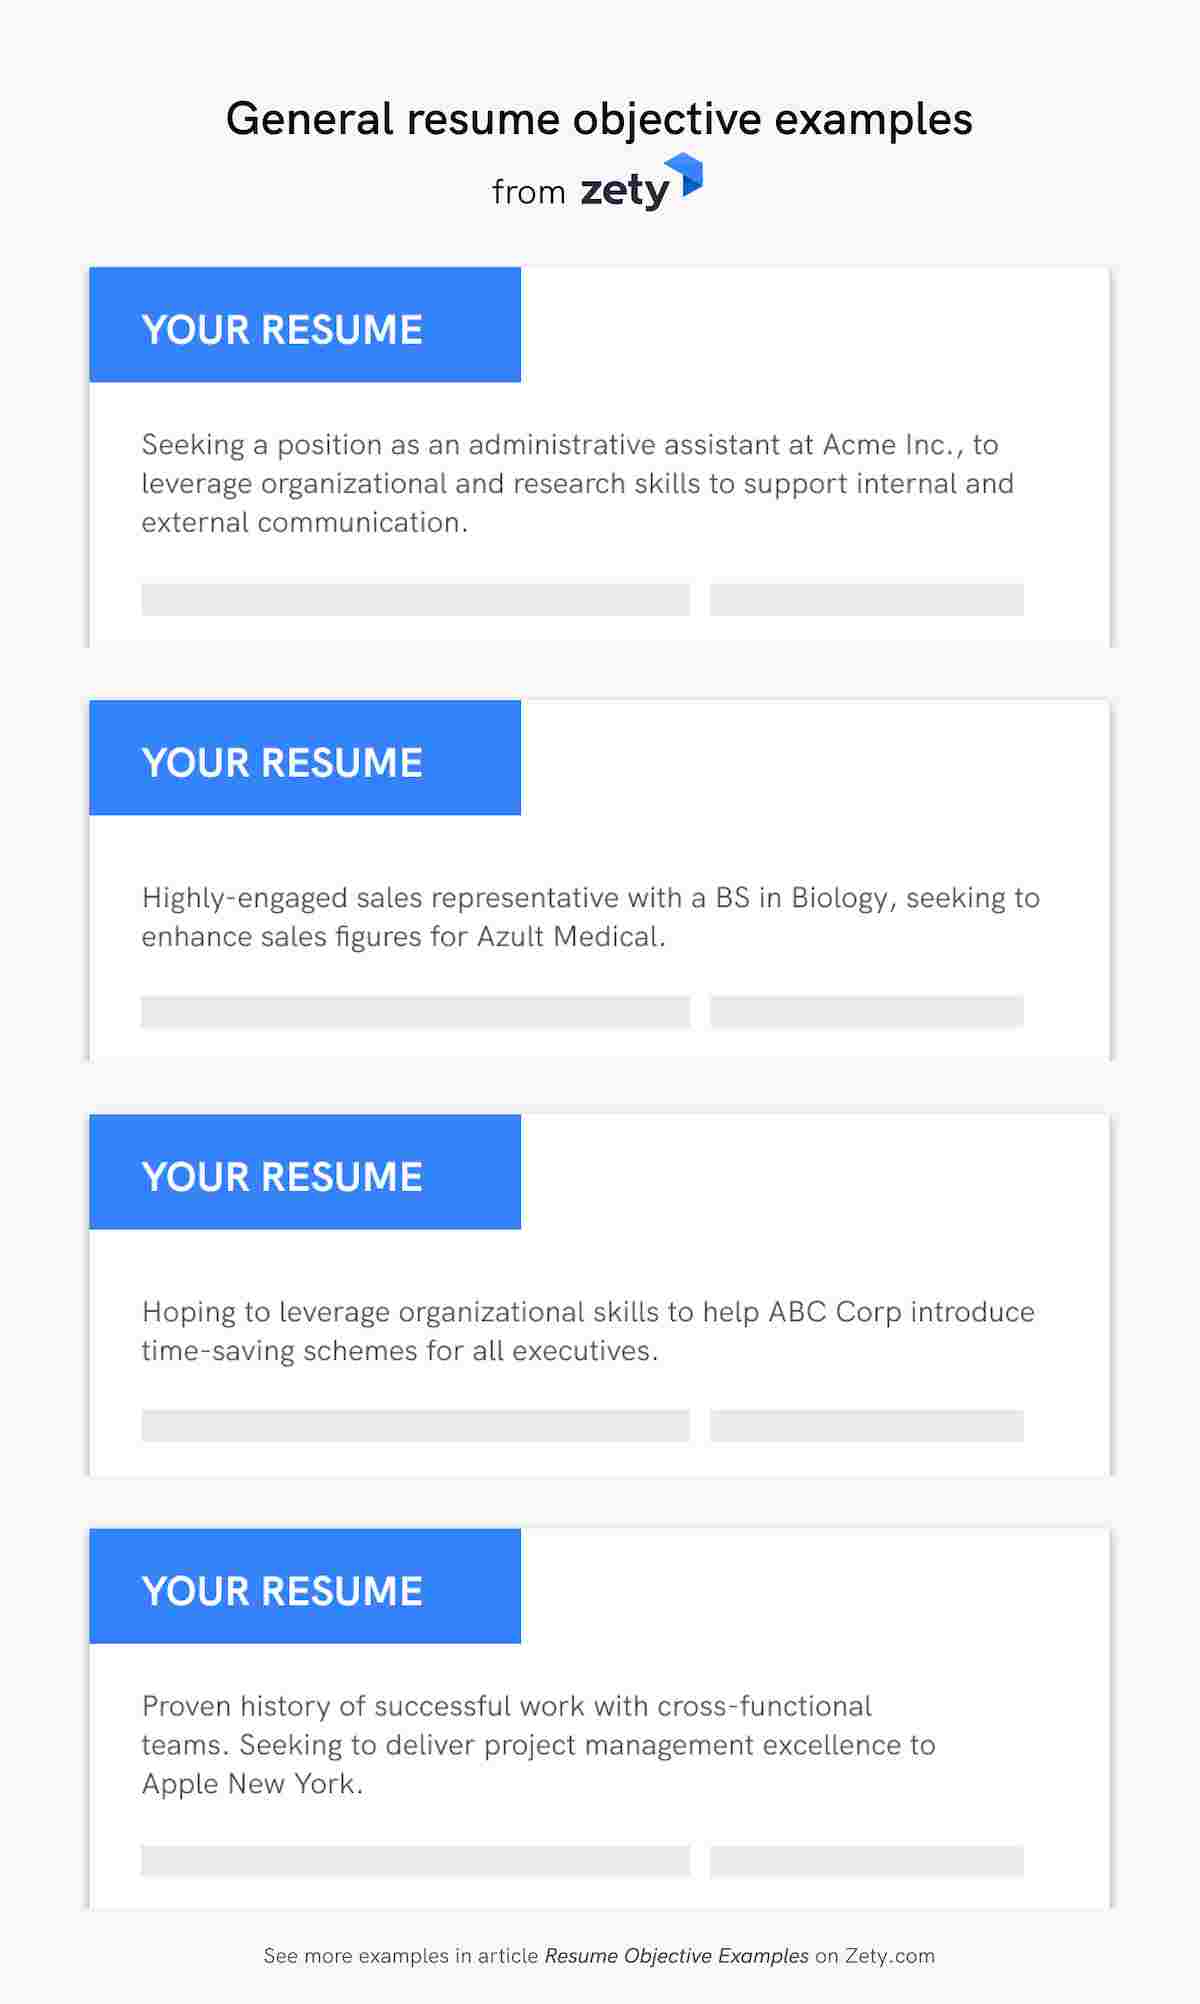 How To Find The Time To resume On Google